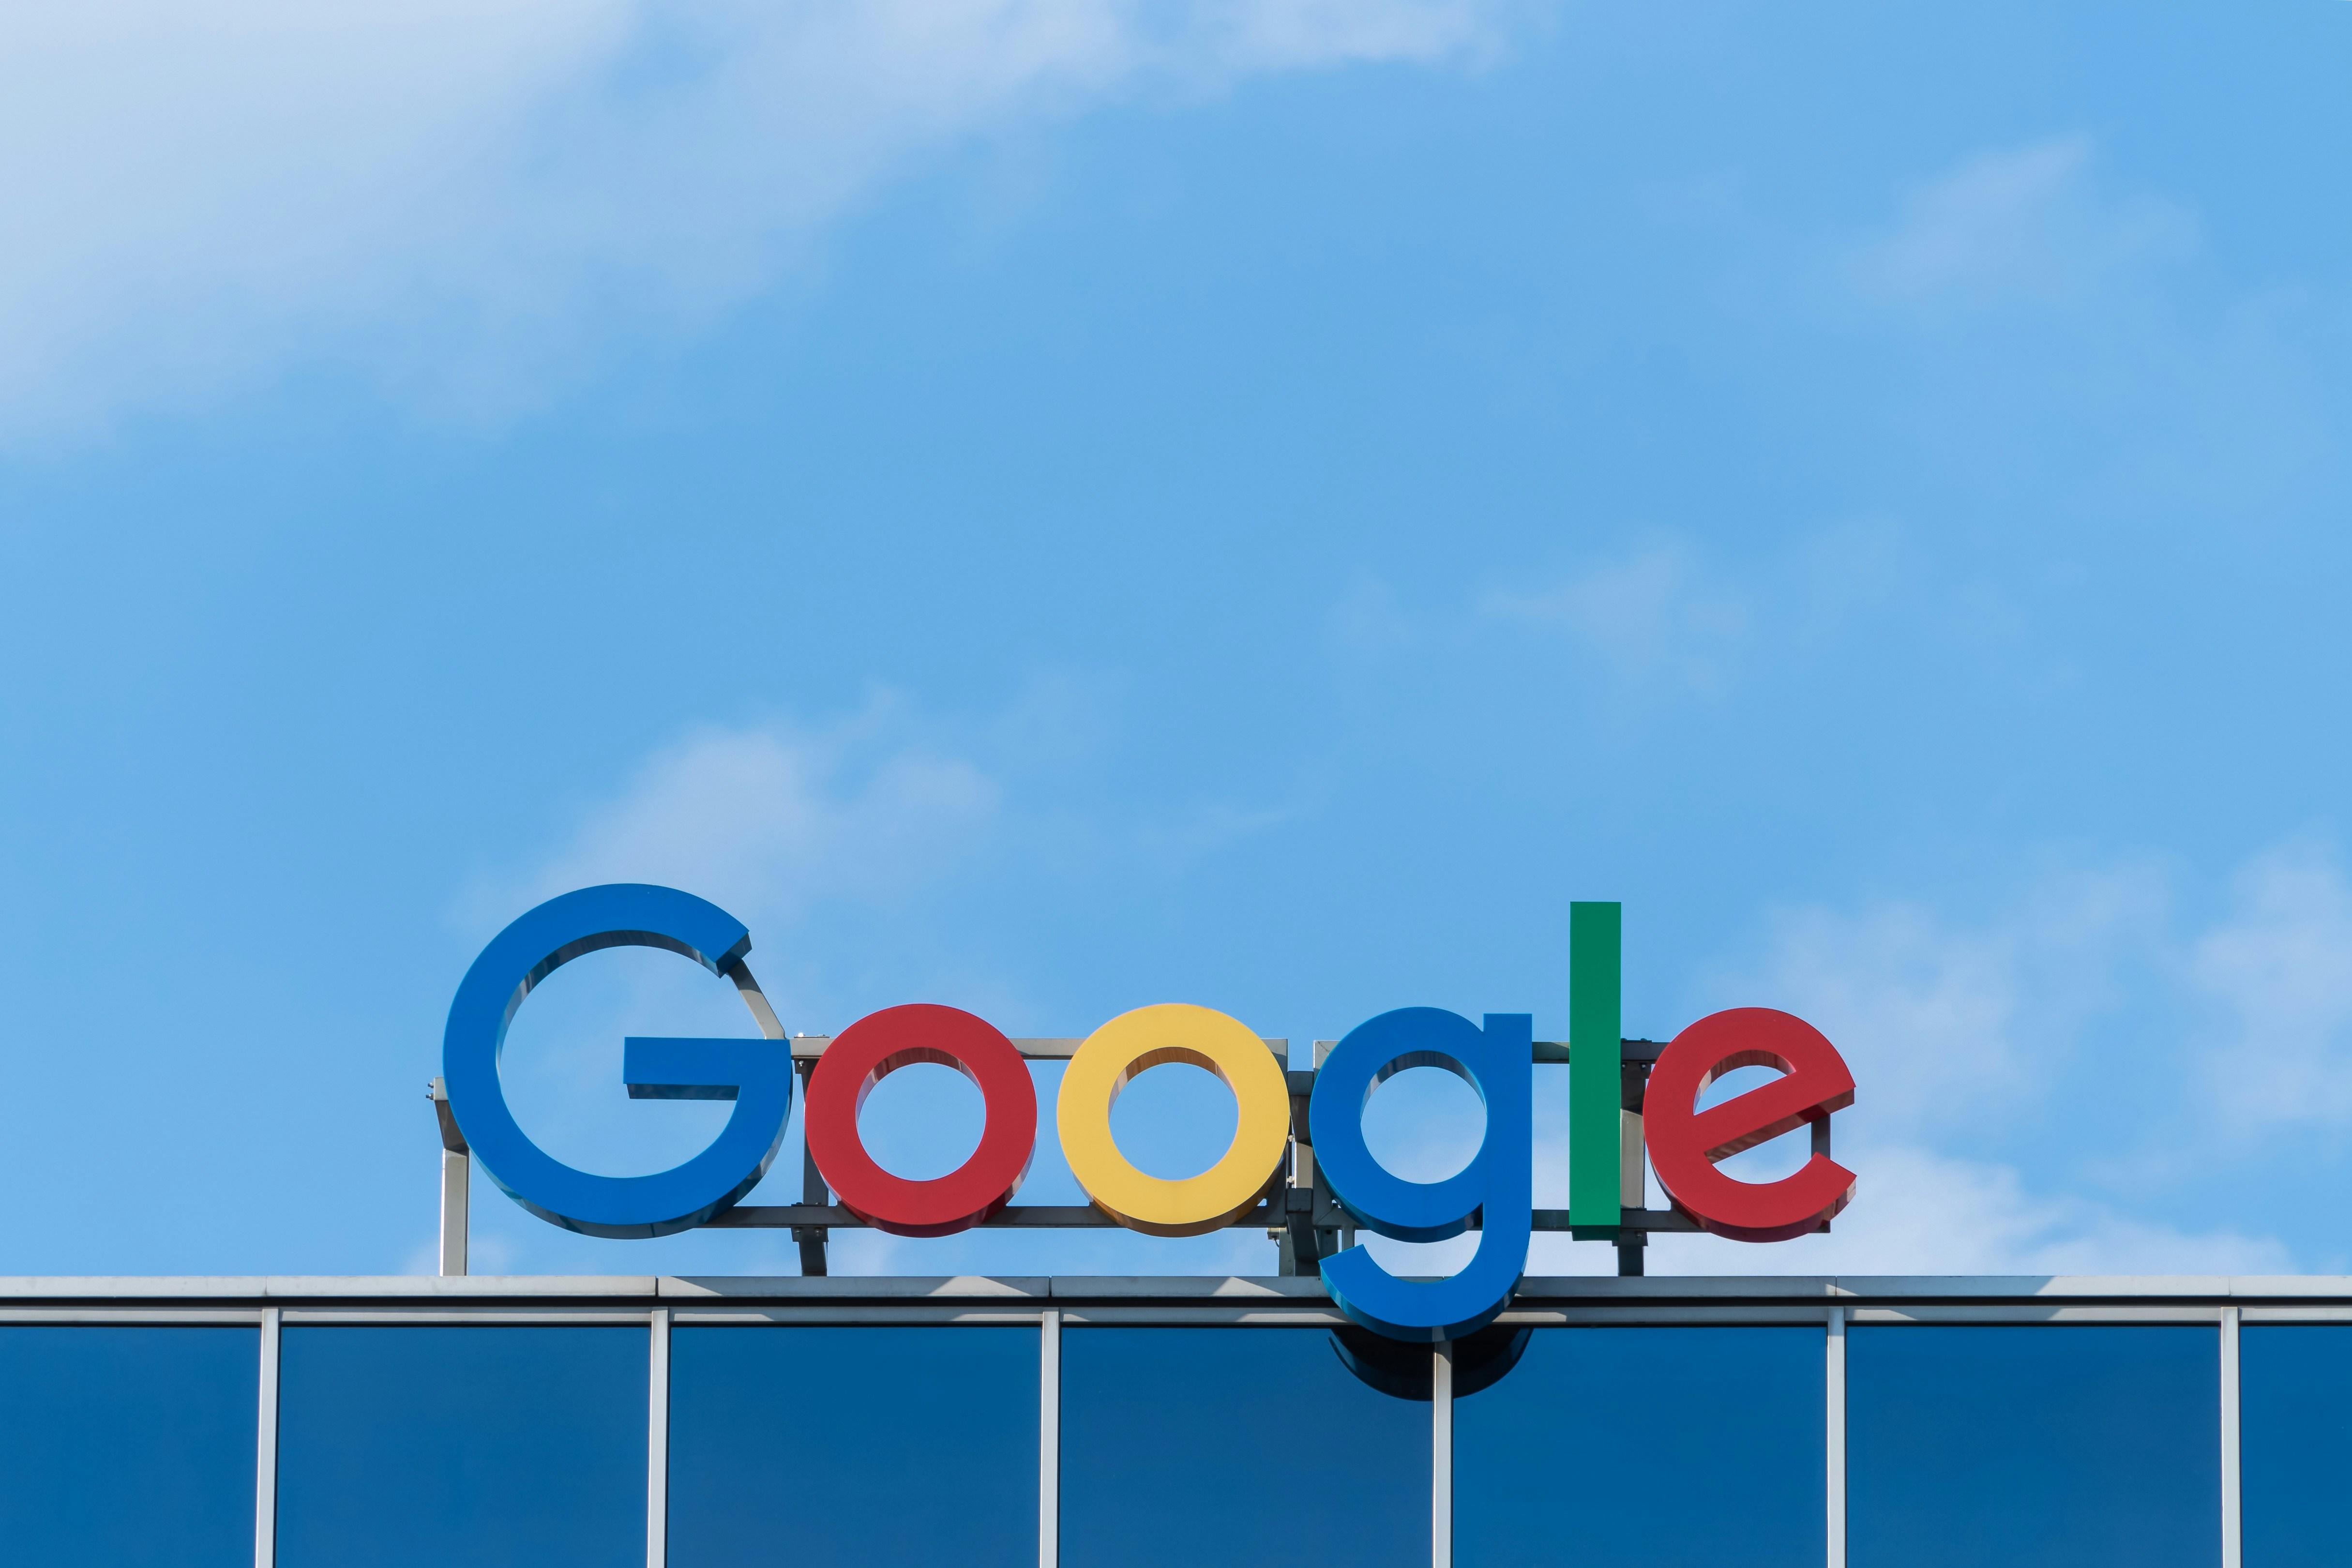 Image is the multi-colored sign of Google's logo at the top of a building, in which each letter alternates in color in the order of blue for G, red for o, yellow for o, blue for g, green for l, and red for e. 